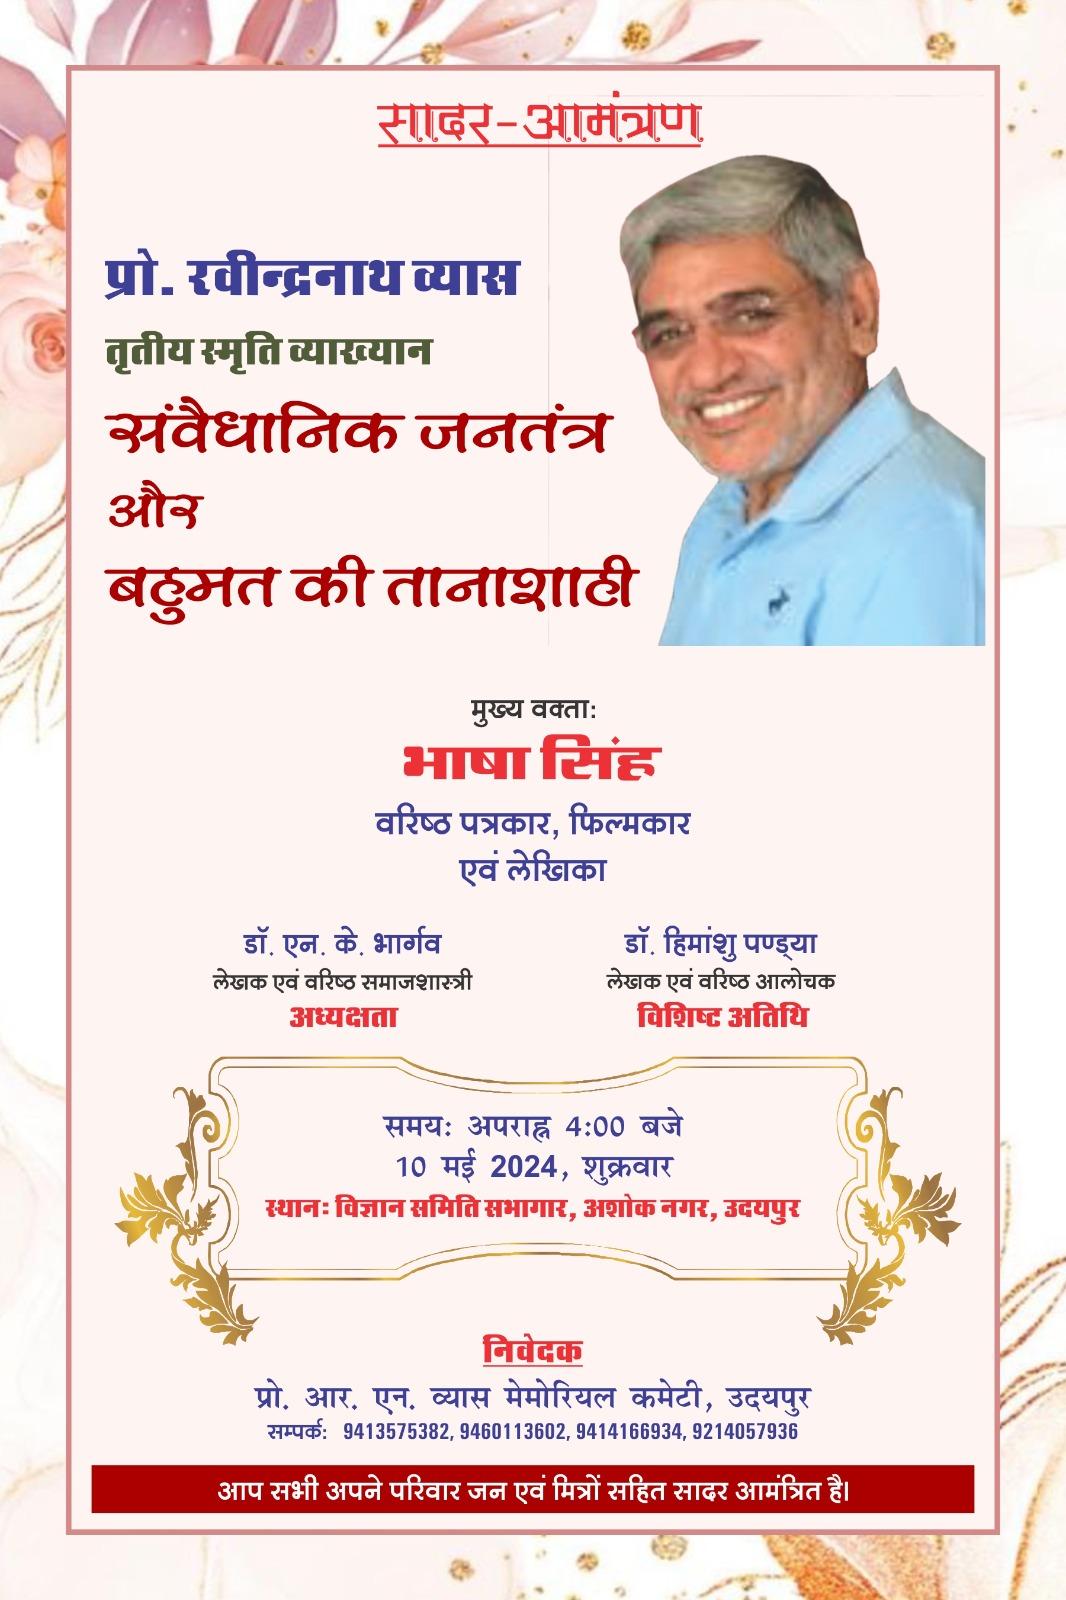 Third Prof. R.N. Vyas Memorial Lecture on May 10